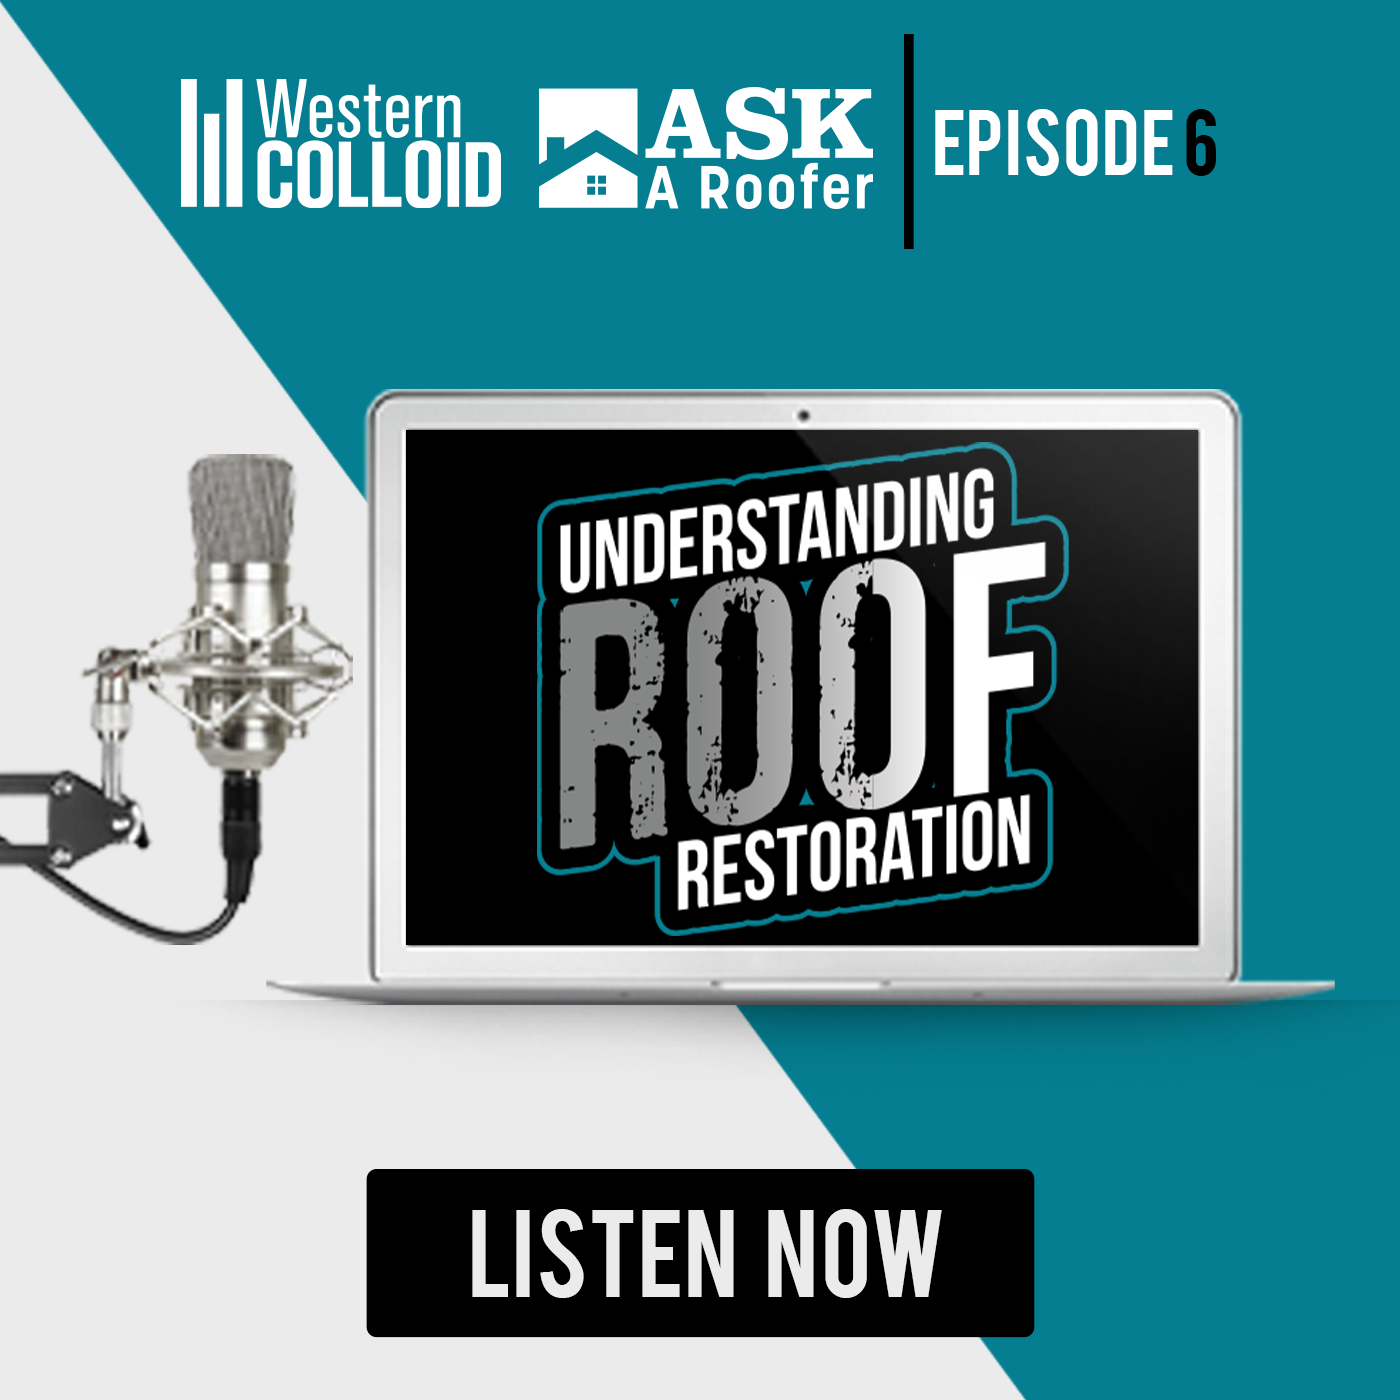 Understanding Roof Restoration Episode 6 - Best Practices For Today’s FARR Systems